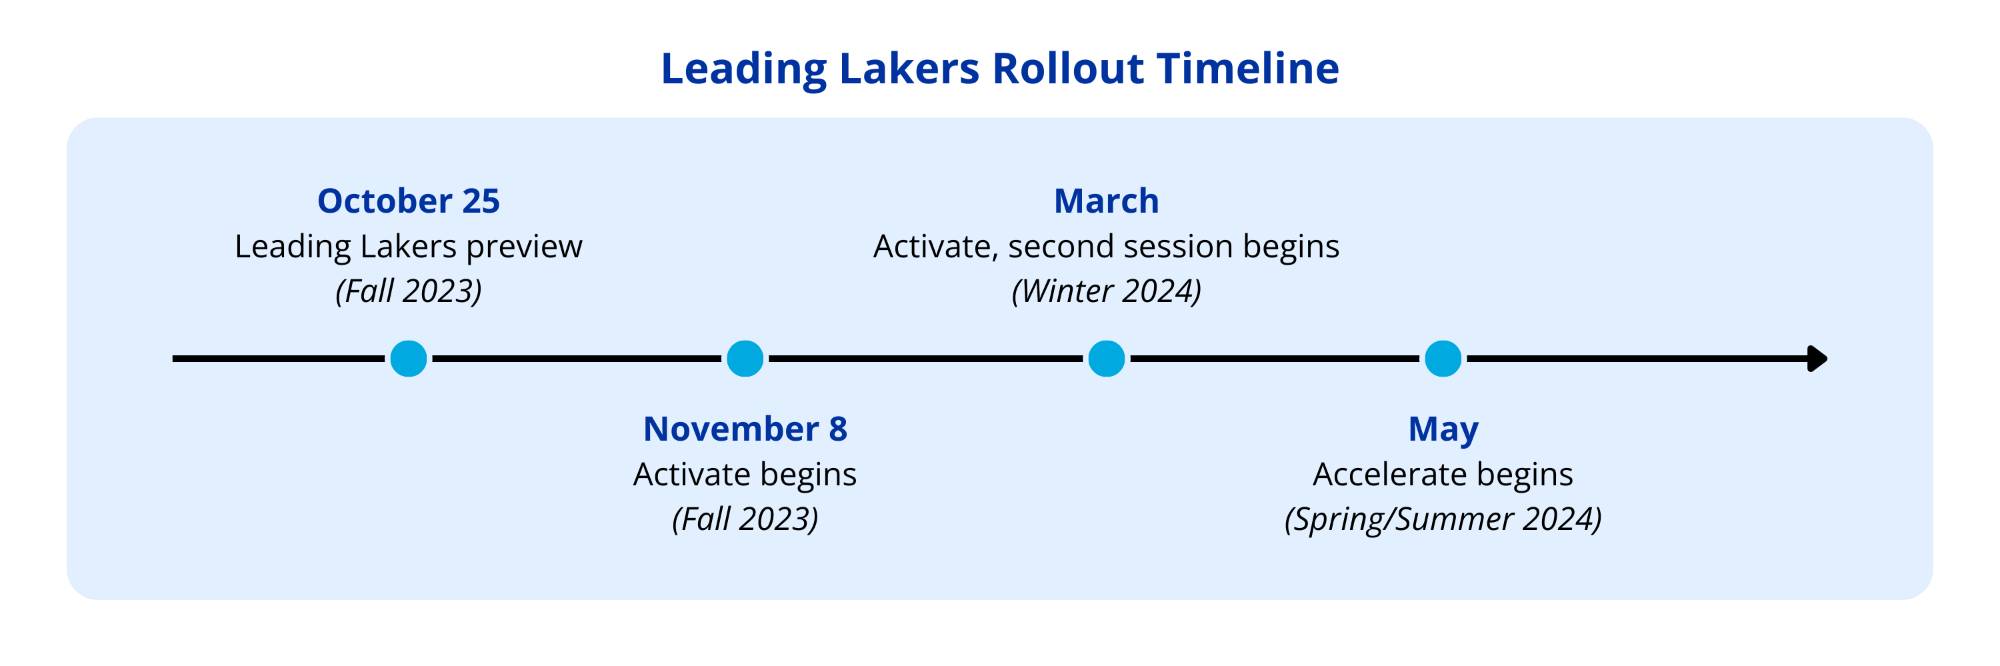 Leading Lakers Rollout Timeline: Leading Lakers preview on October 25, Activate begins November 8, the second session of Activate begins in March 2024, and Accelerate begins in May 2024.